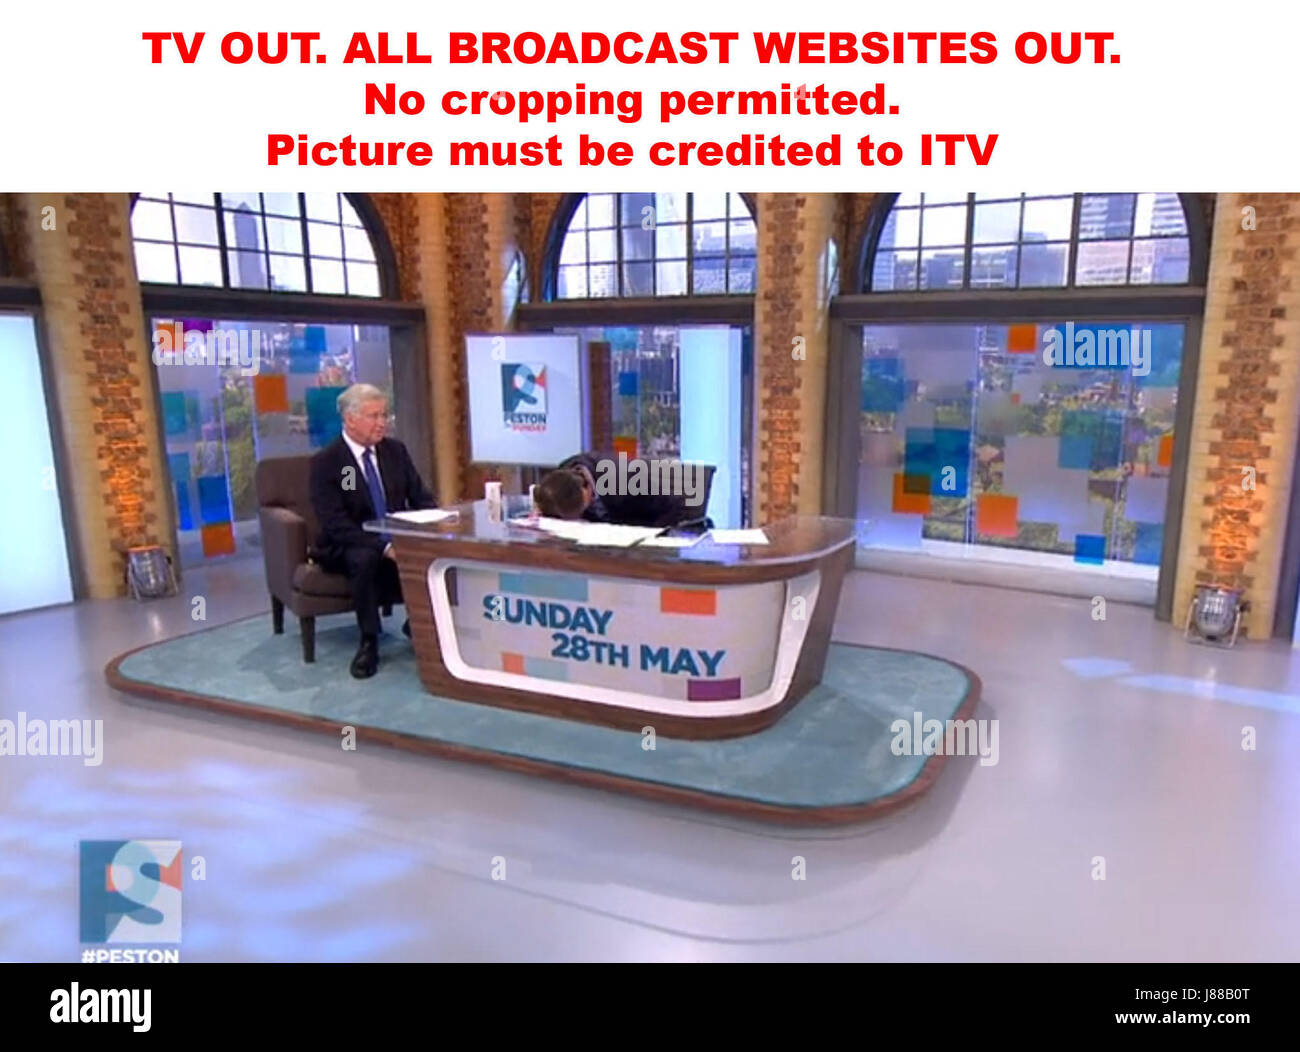 TV OUT. ALL BROADCAST WEBSITES OUT. No cropping permitted. Picture must be credited to ITV. We are advised that videograbs should not be used more than 48 hours after the time of original transmission, without the consent of the copyright holder. Video grab taken from ITV of Robert Peston banging his head on the desk following a heated exchange with Sir Michael Fallon (left) on the Peston On Sunday show. Stock Photo